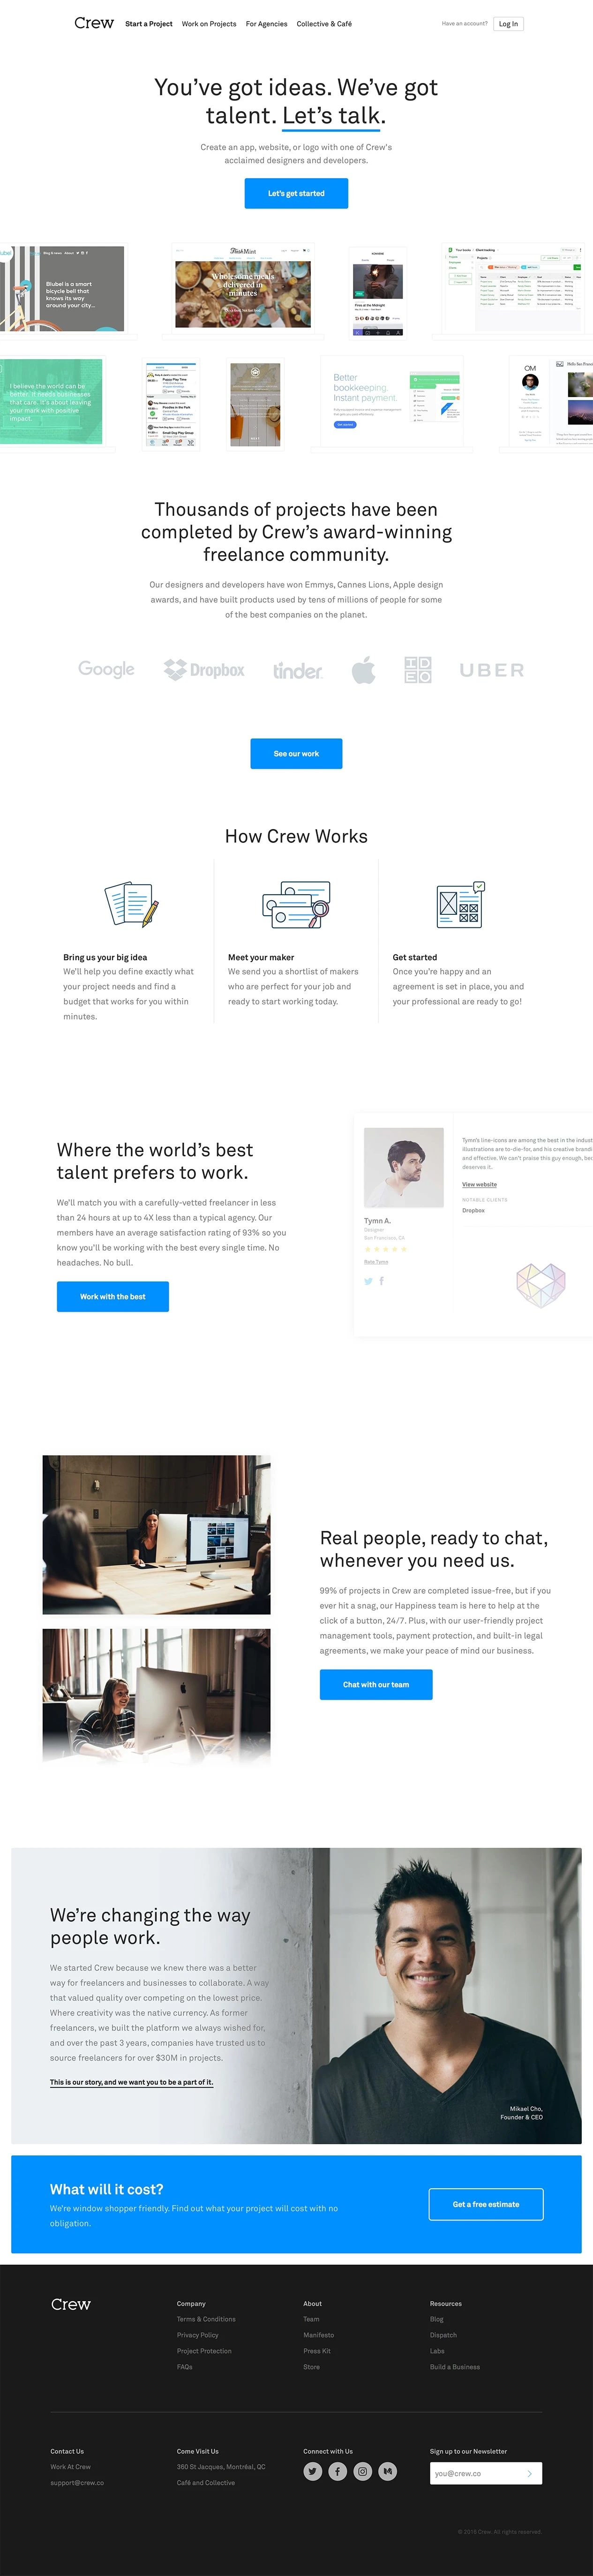 Crew Landing Page Example: Create an app, website, or logo with one of Crew's acclaimed designers and developers.